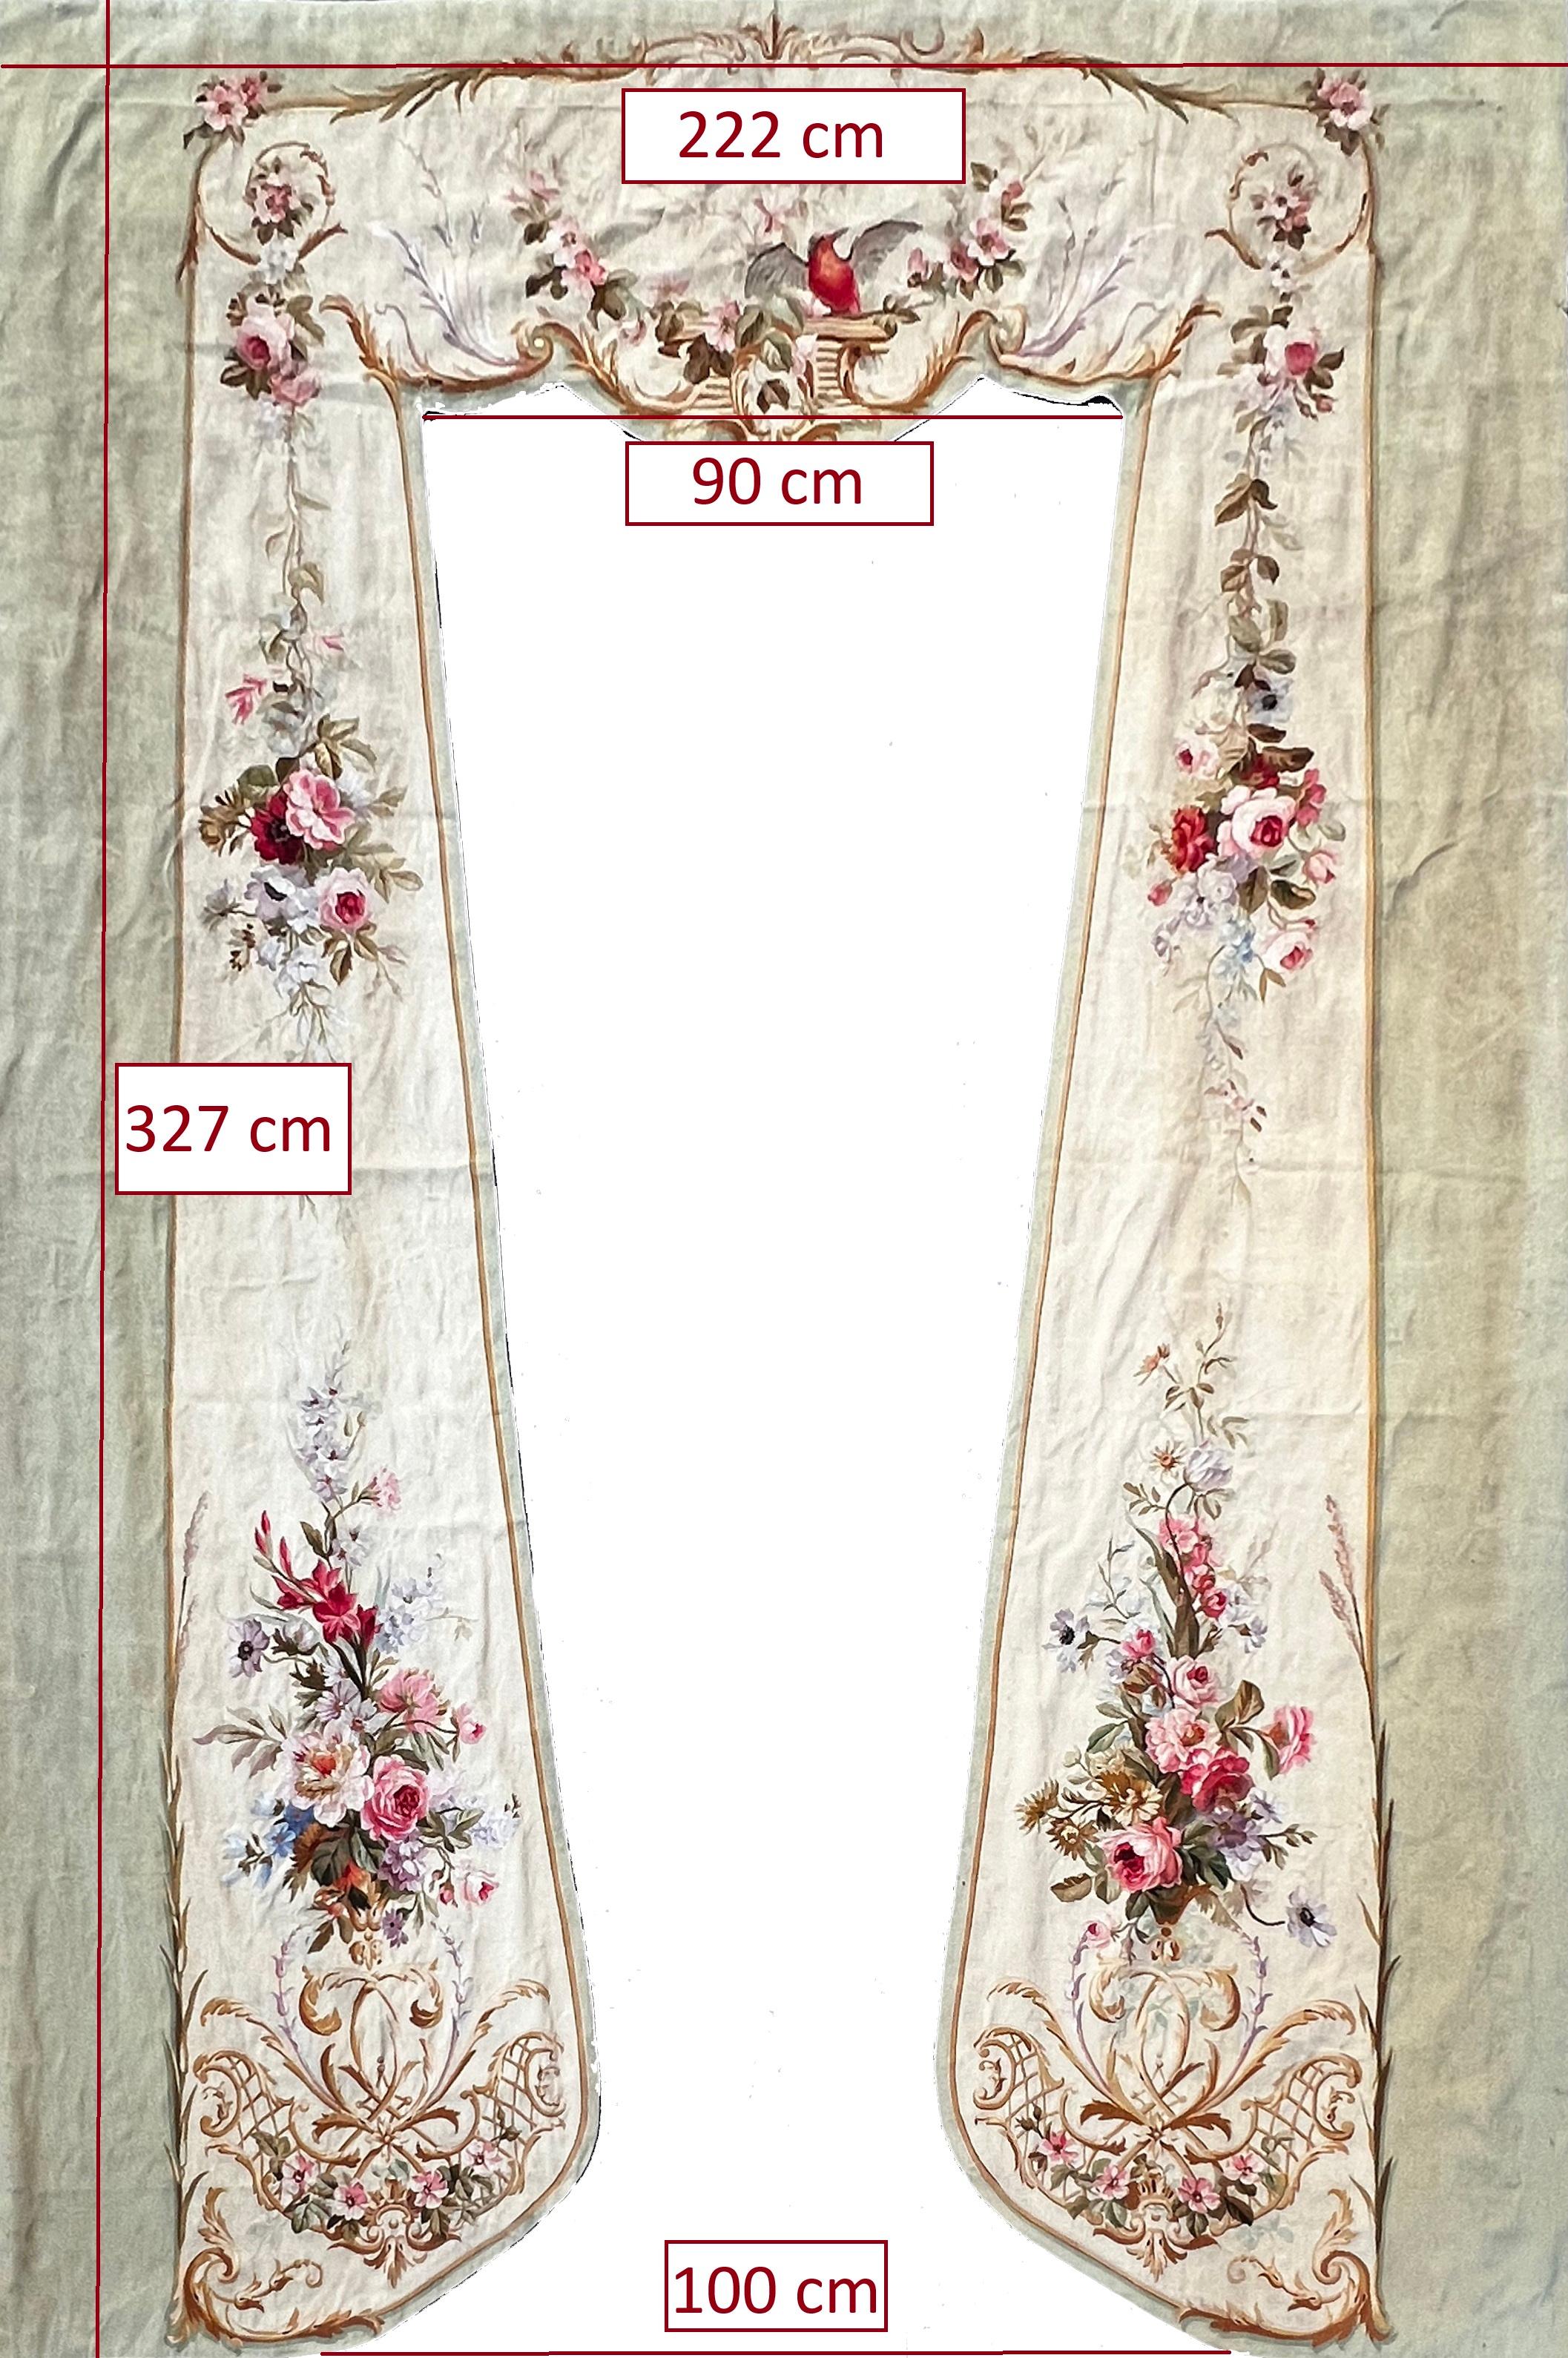 19th century Aubusson Tapestry Valance - 3m27x2m22 - No. 1356 For Sale 3